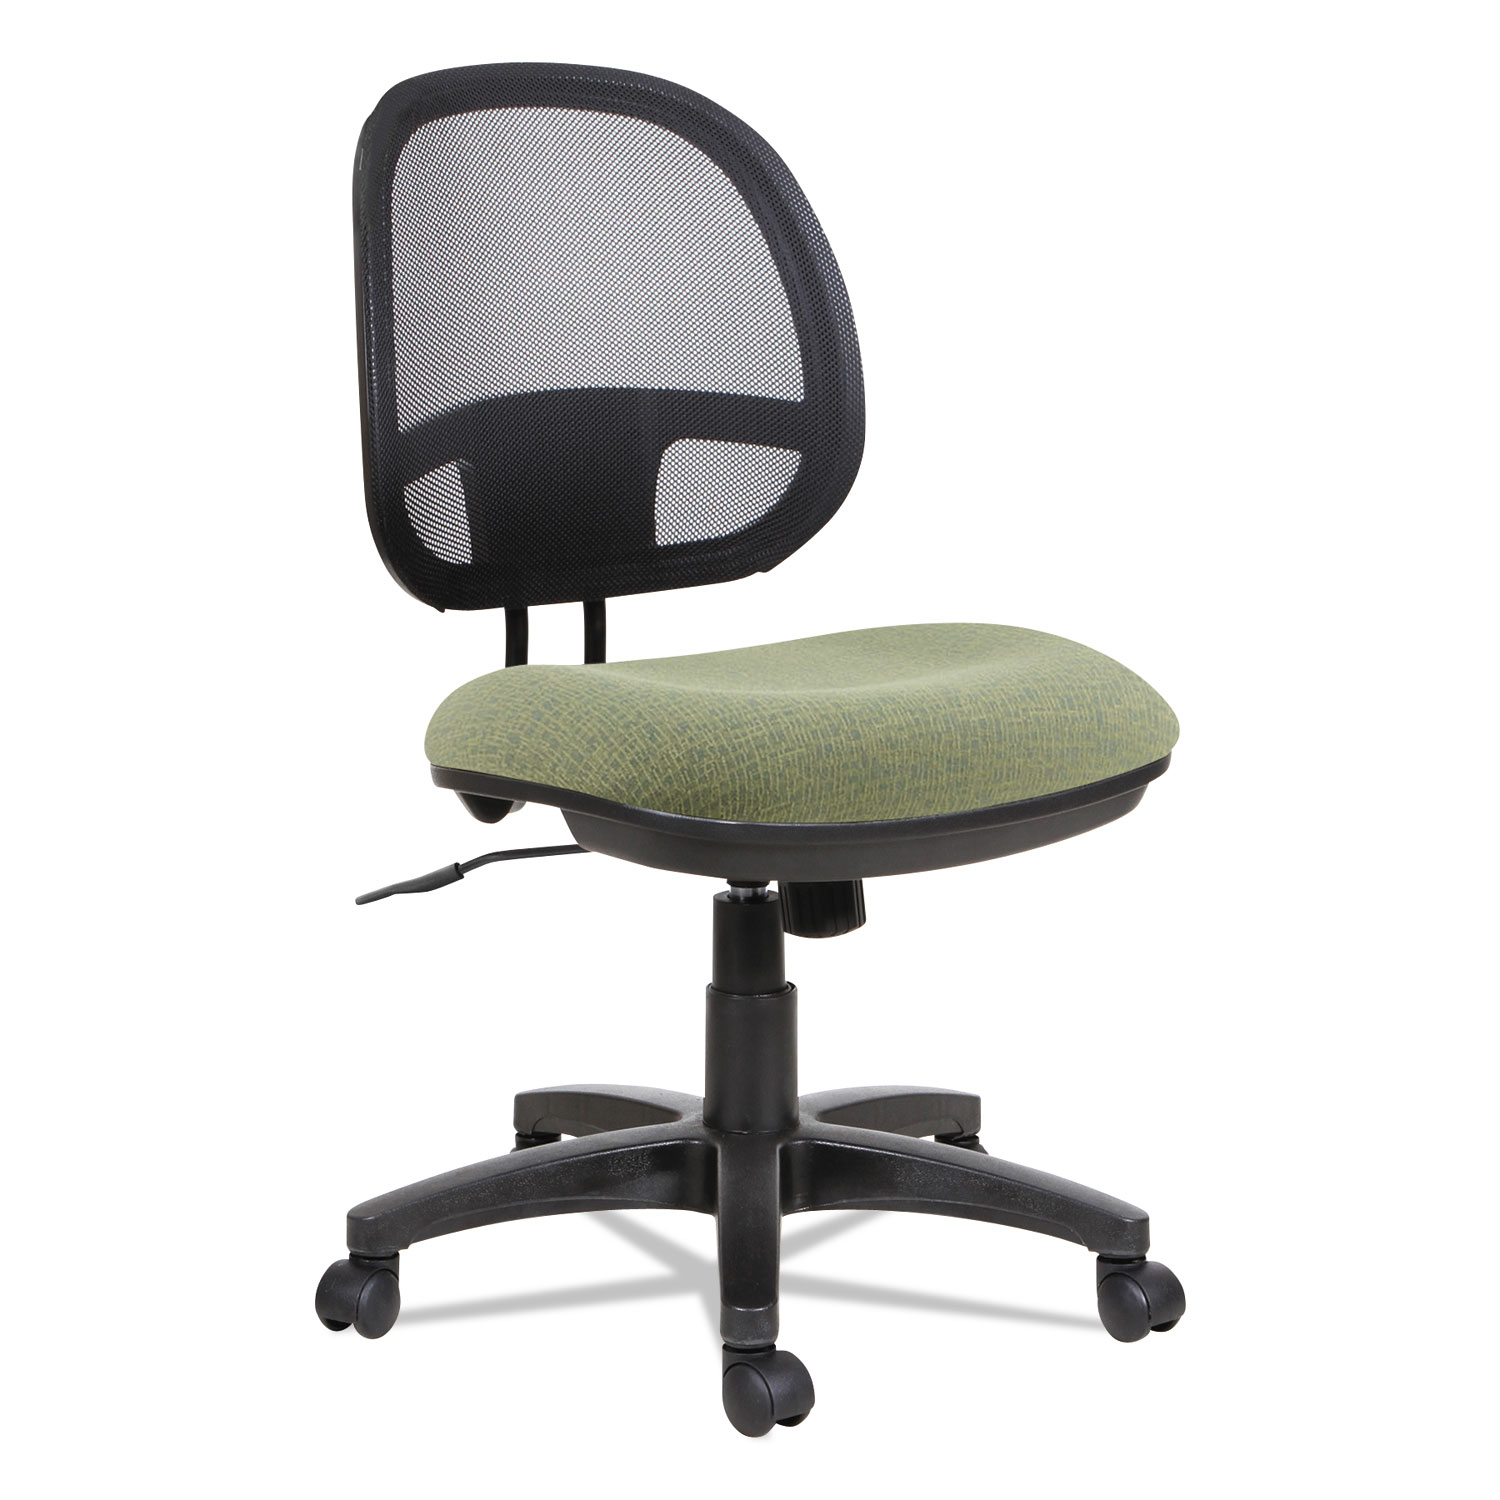  Alera ALEIN4874 Alera Interval Series Swivel/Tilt Mesh Chair, Supports up to 275 lbs., Parrot Green Seat/Parrot Green Back, Black Base (ALEIN4874) 